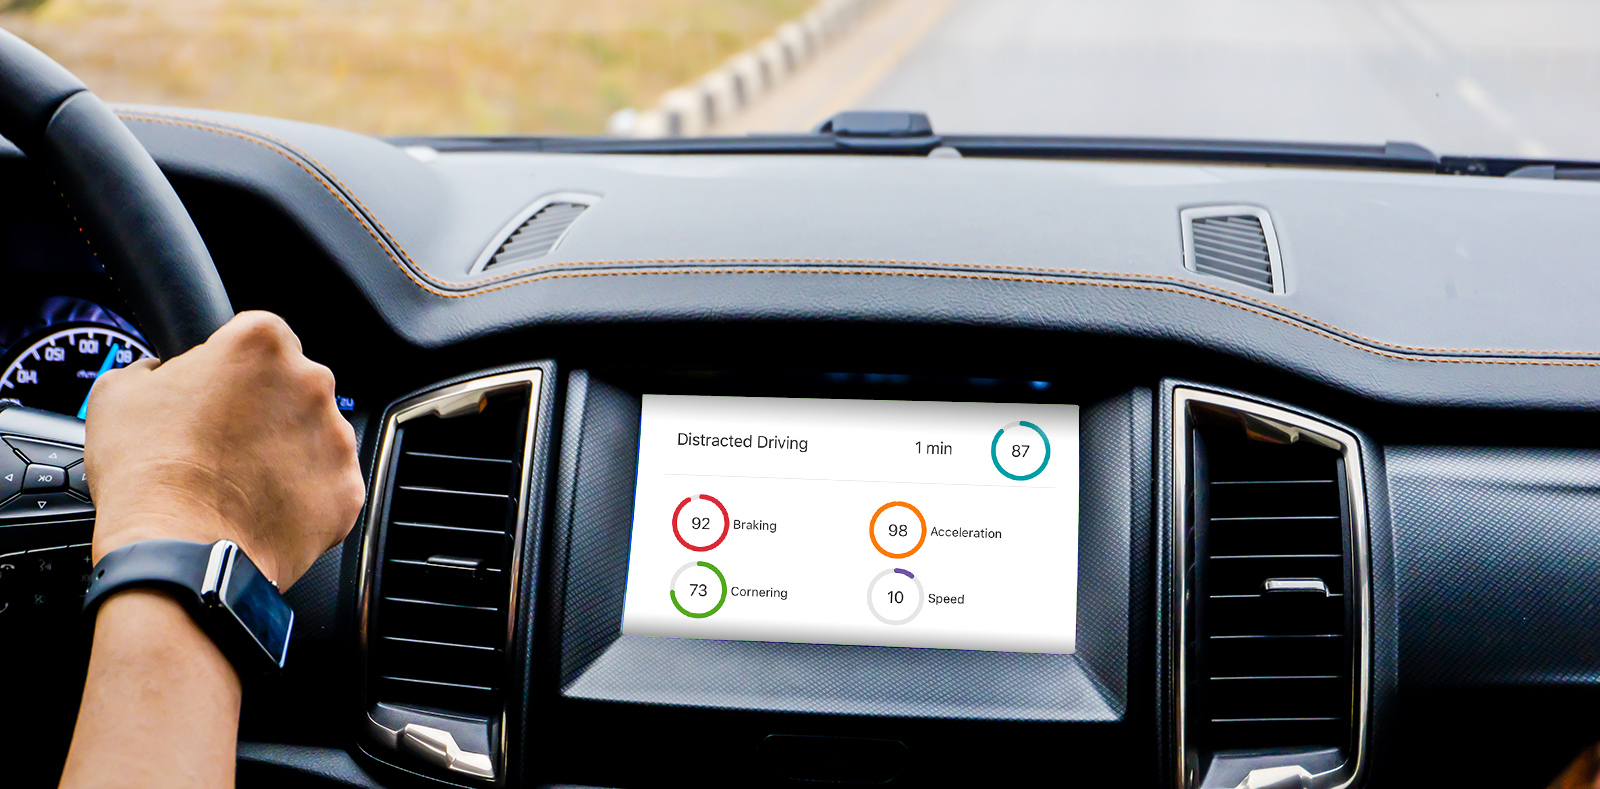 OEM Embedded Telematics: Key Advantages and Challenges for Data Collection